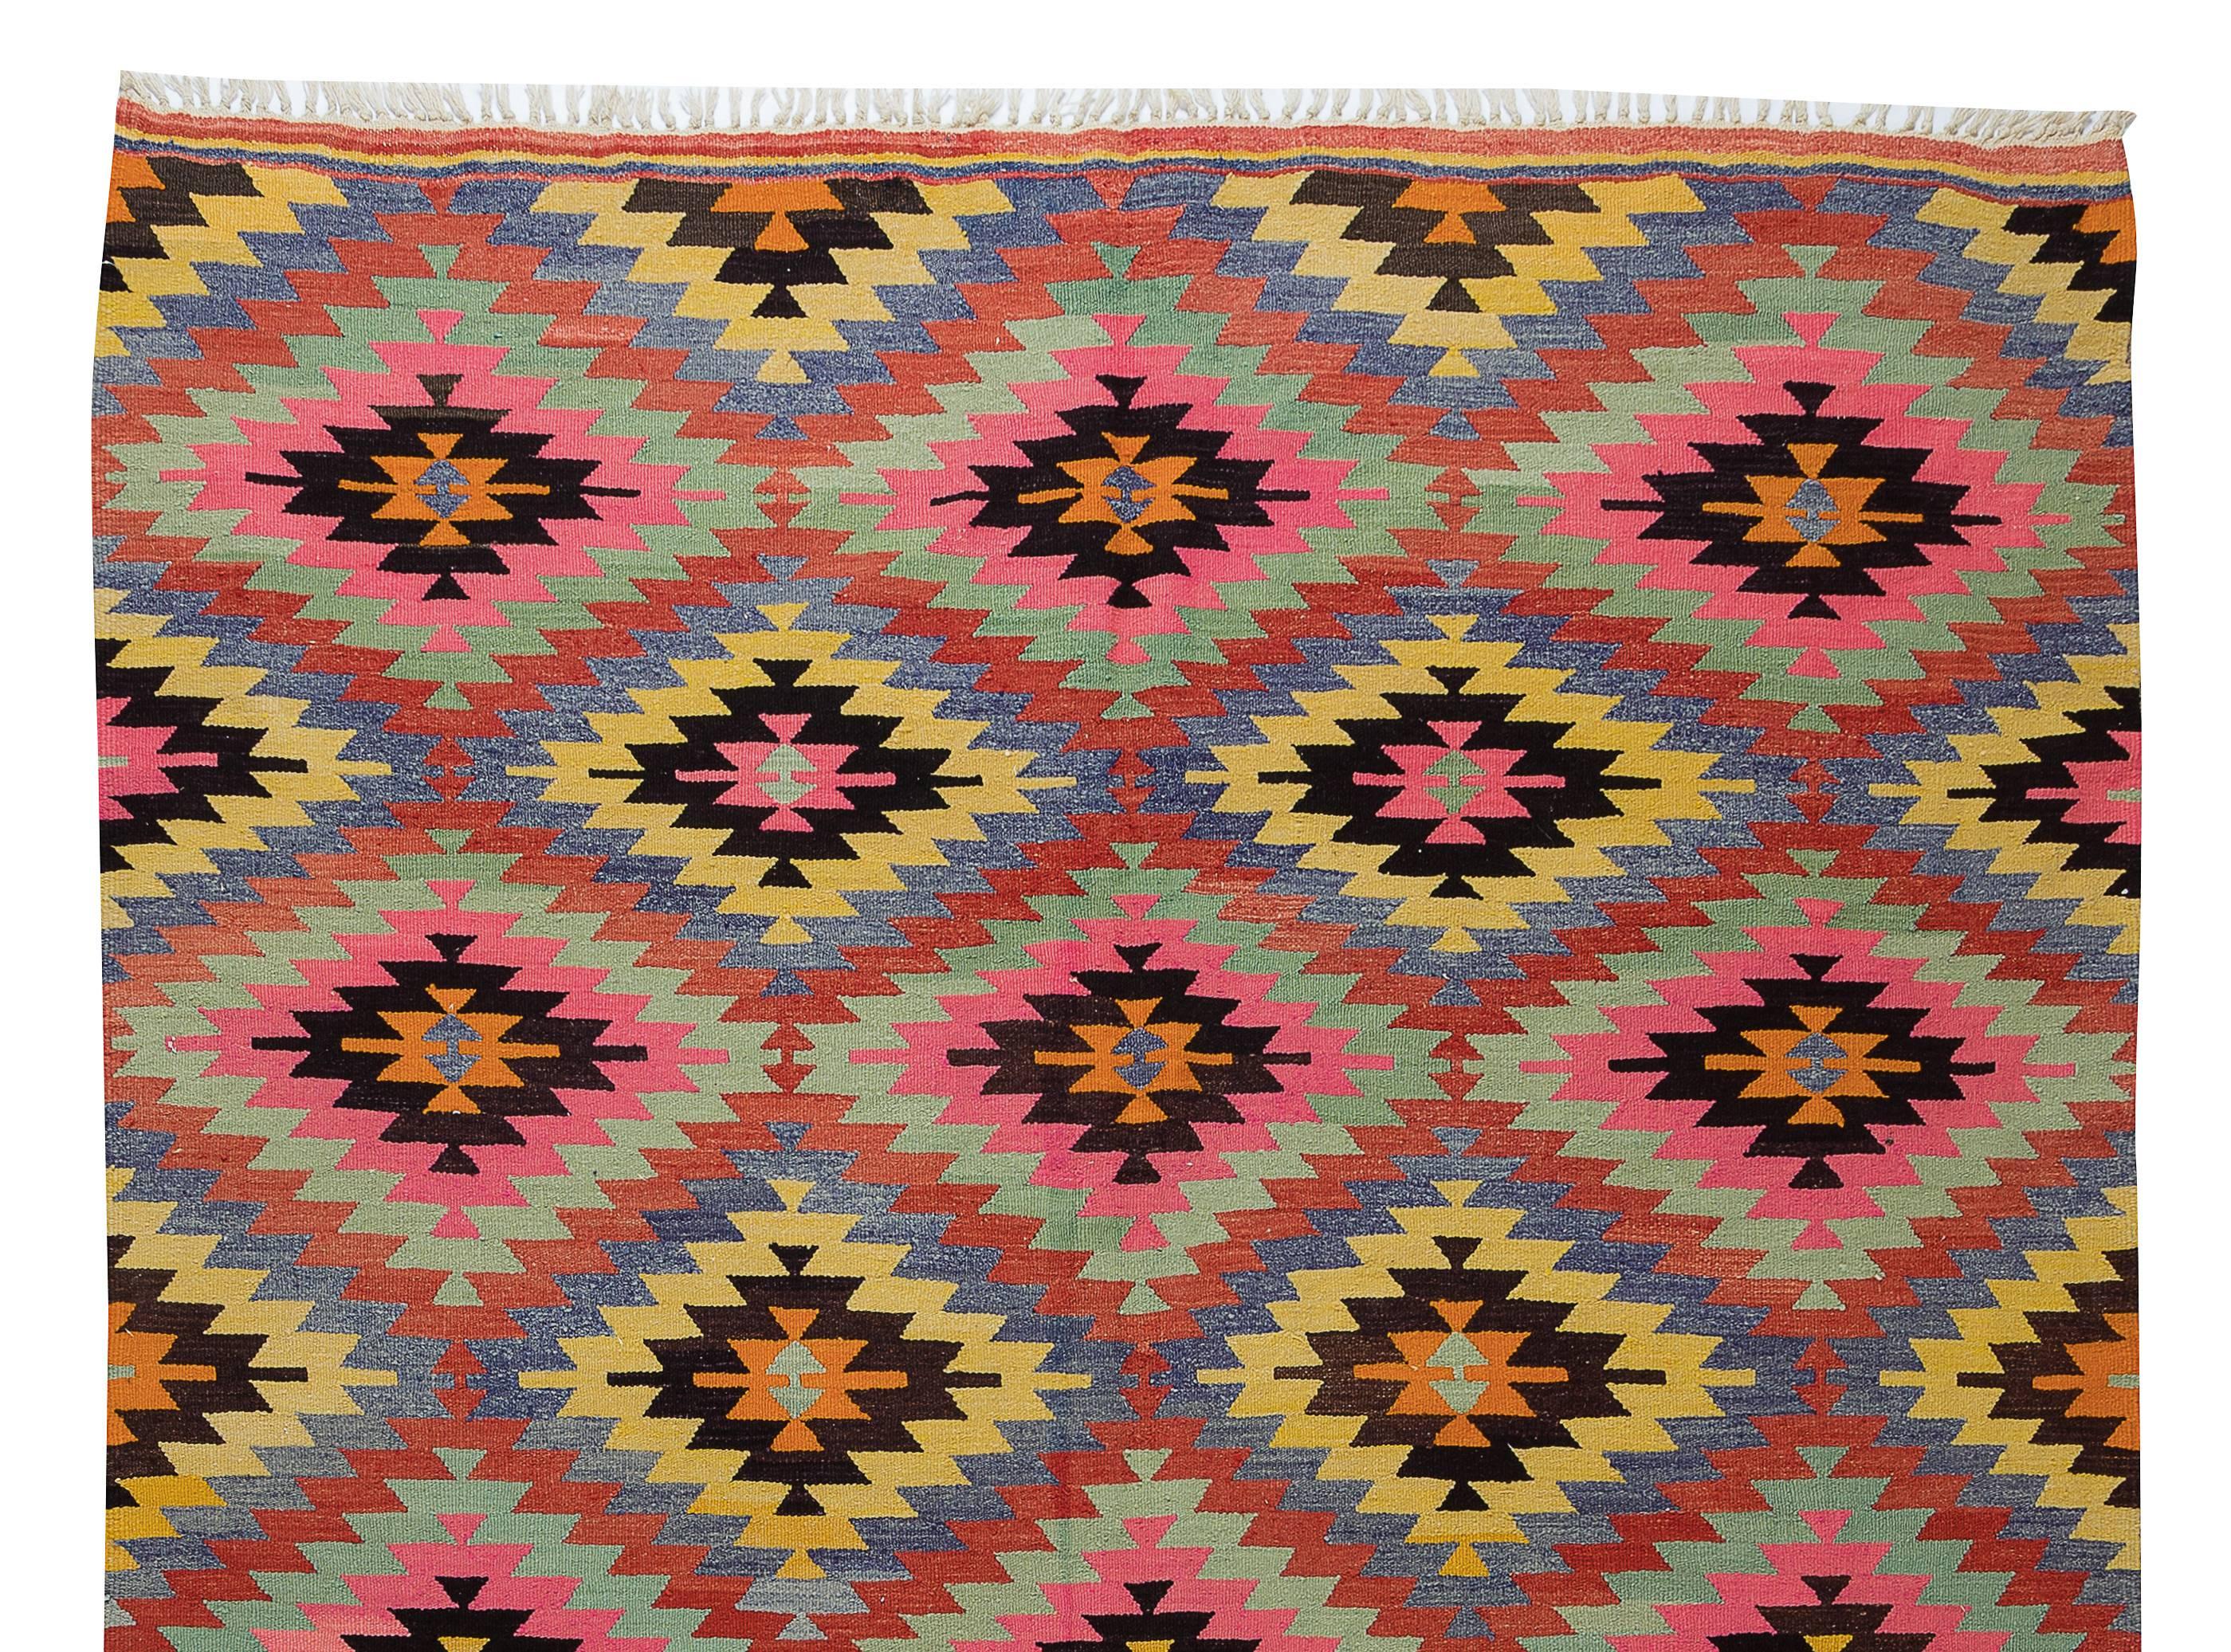 Hand-Woven 6.4x9.6 Ft Dazzling Handmade Anatolian Wool Kilim, One of a Kind Flat-Weave Rug For Sale